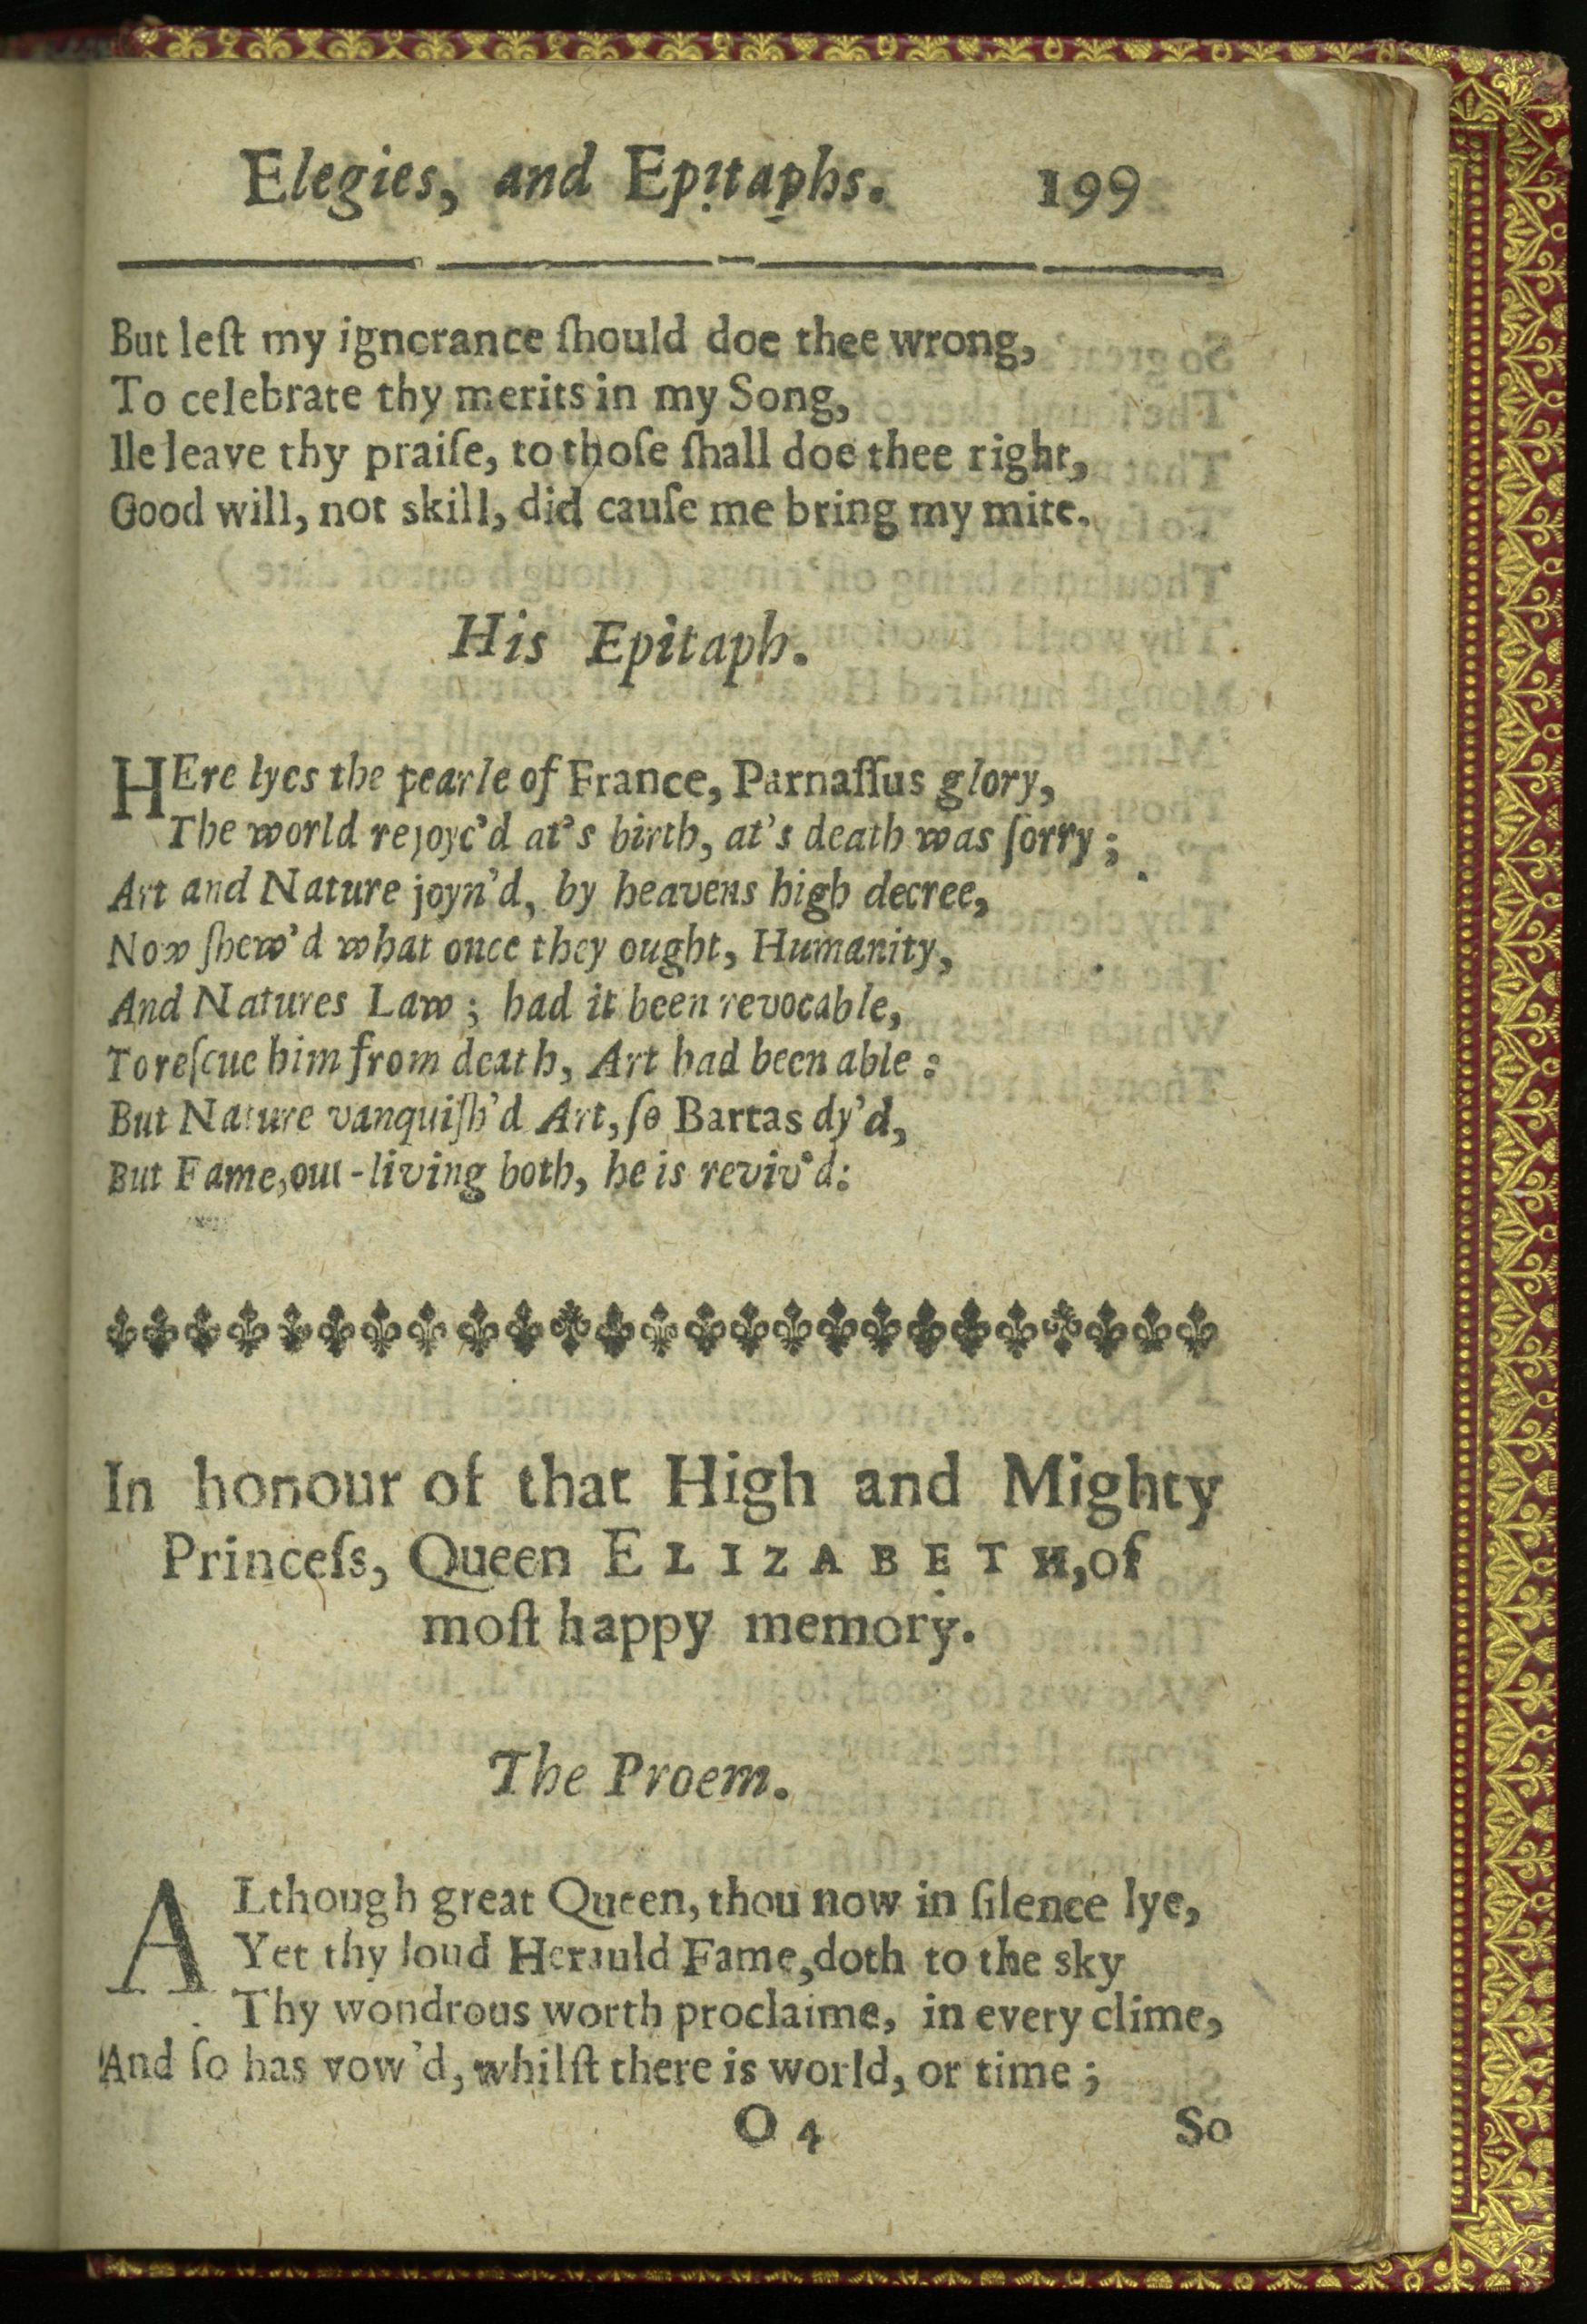 17th century page of printed text in rhyming couplets with decorative border. The letter S is printed with the character F.